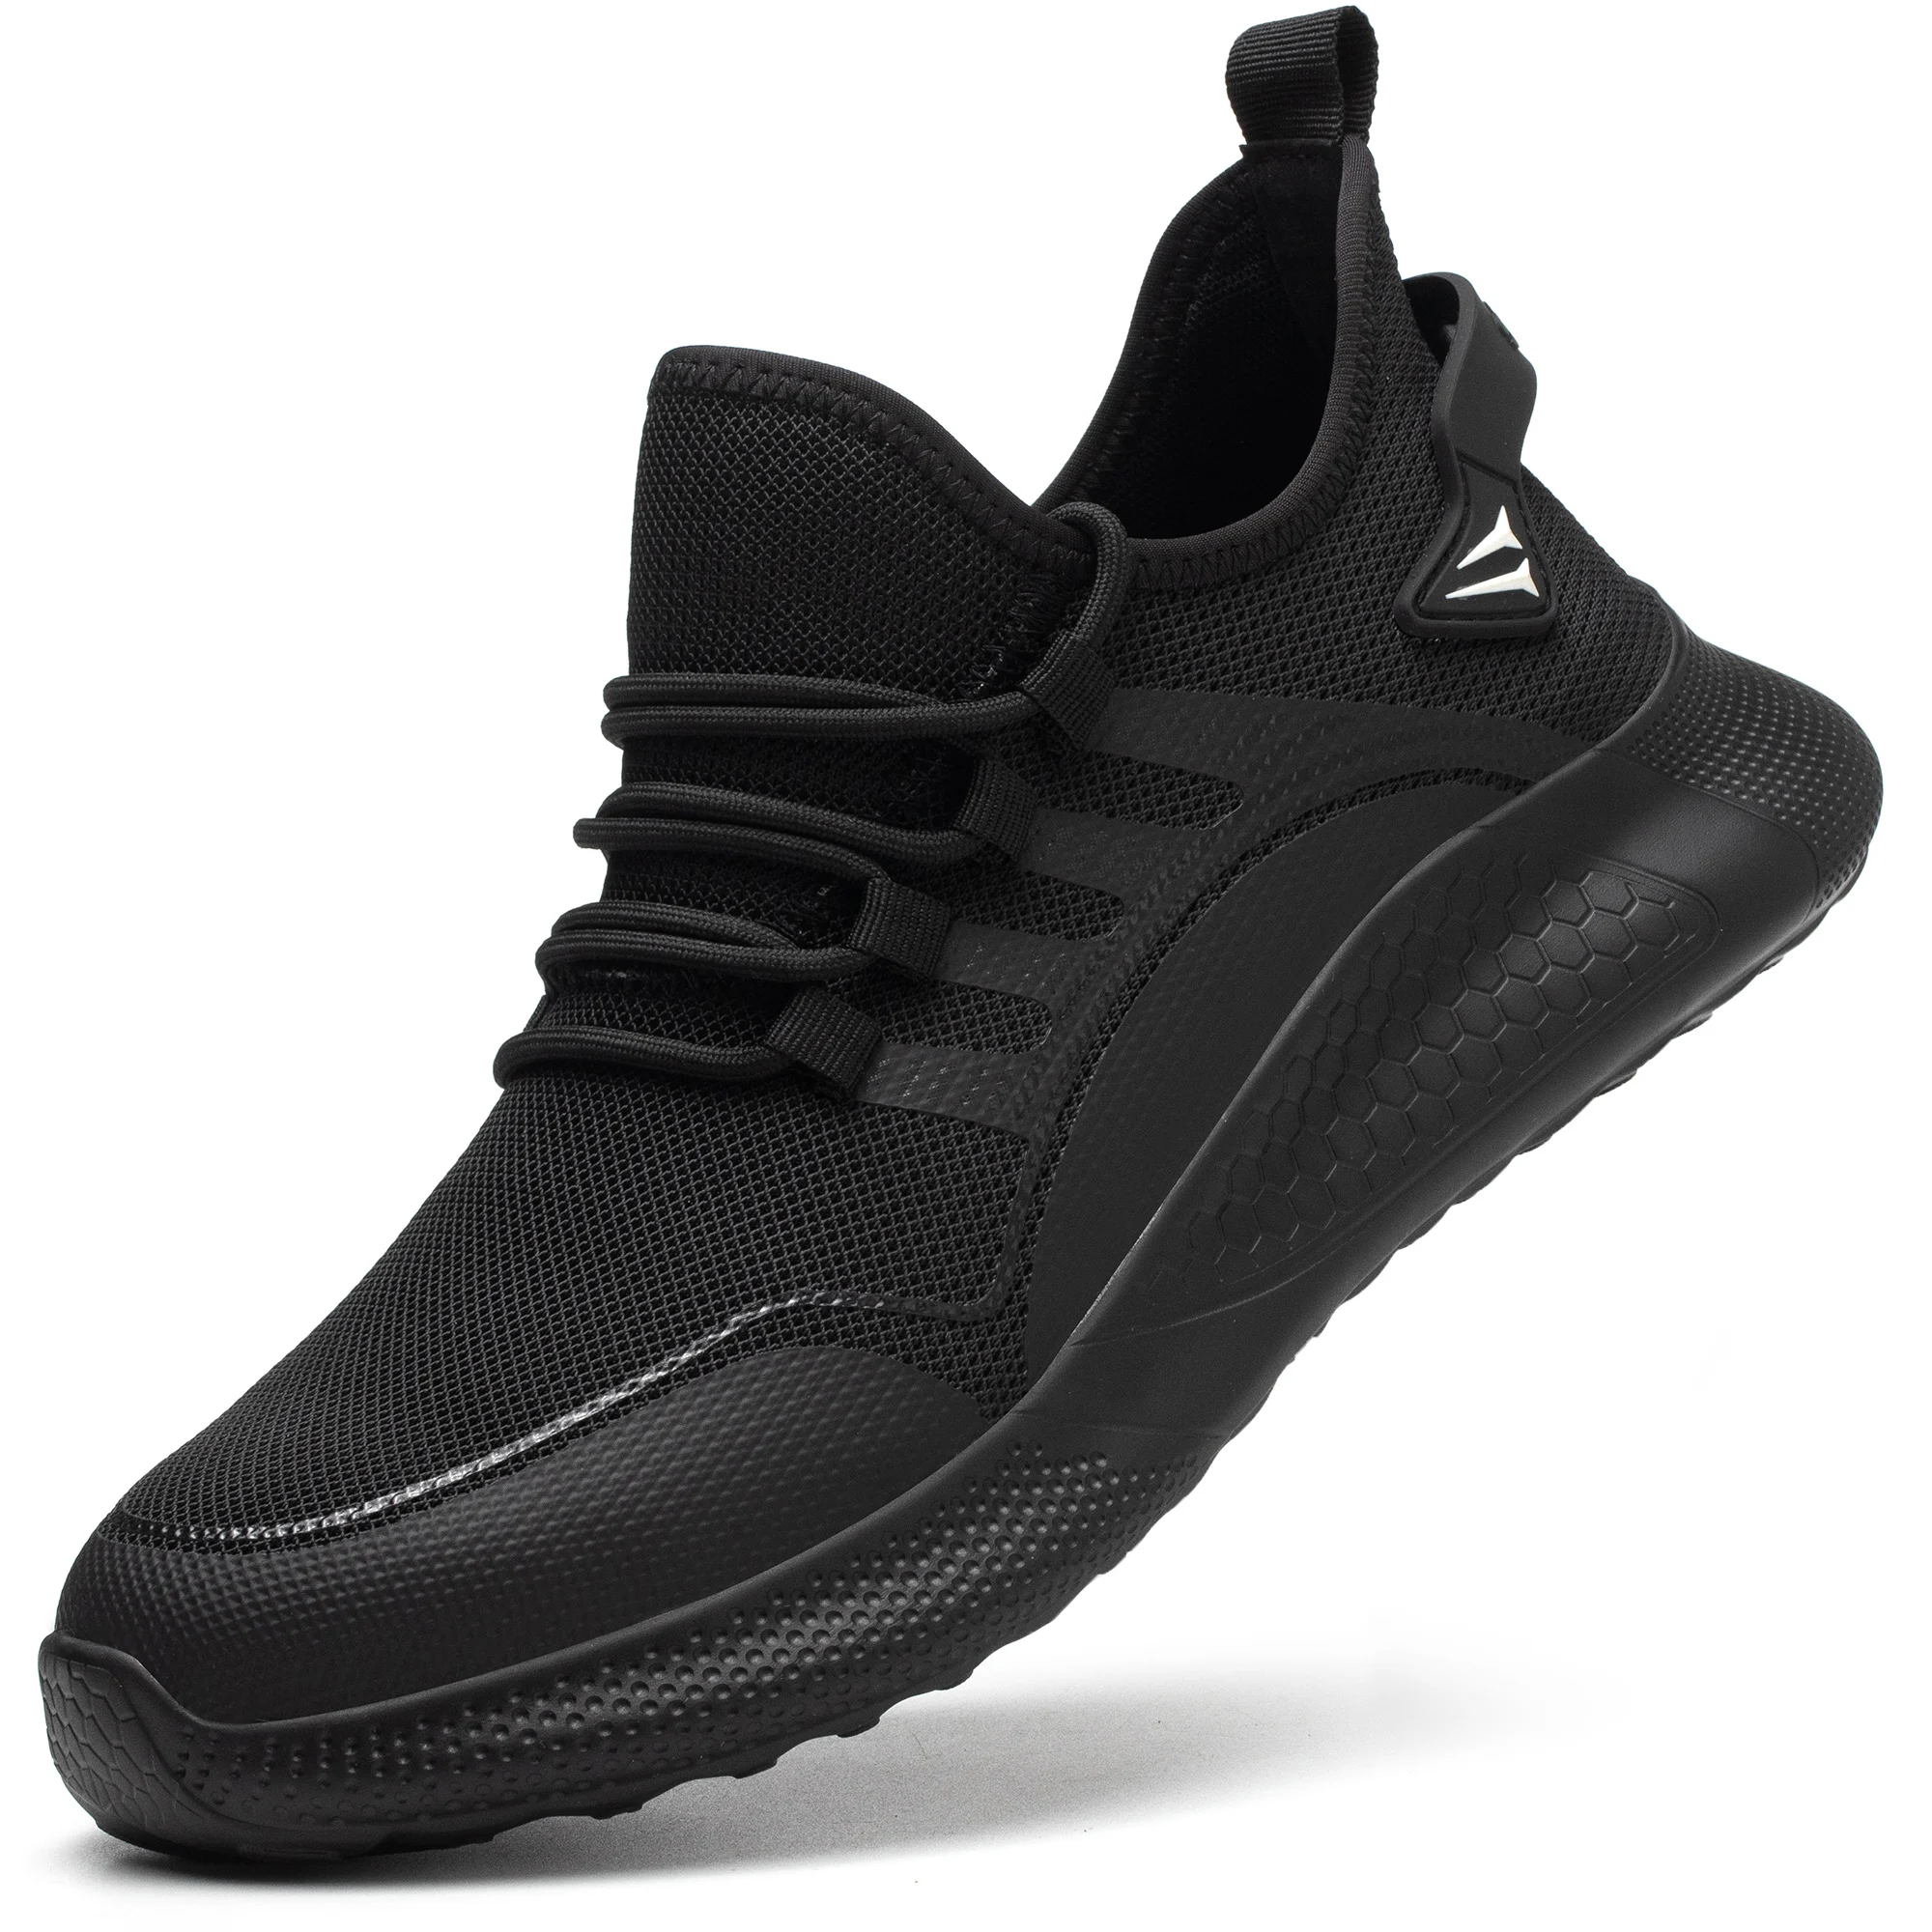 Lightweight Work Safety Shoes For Man Breathable Sports Safety Shoes Wor... - $69.00